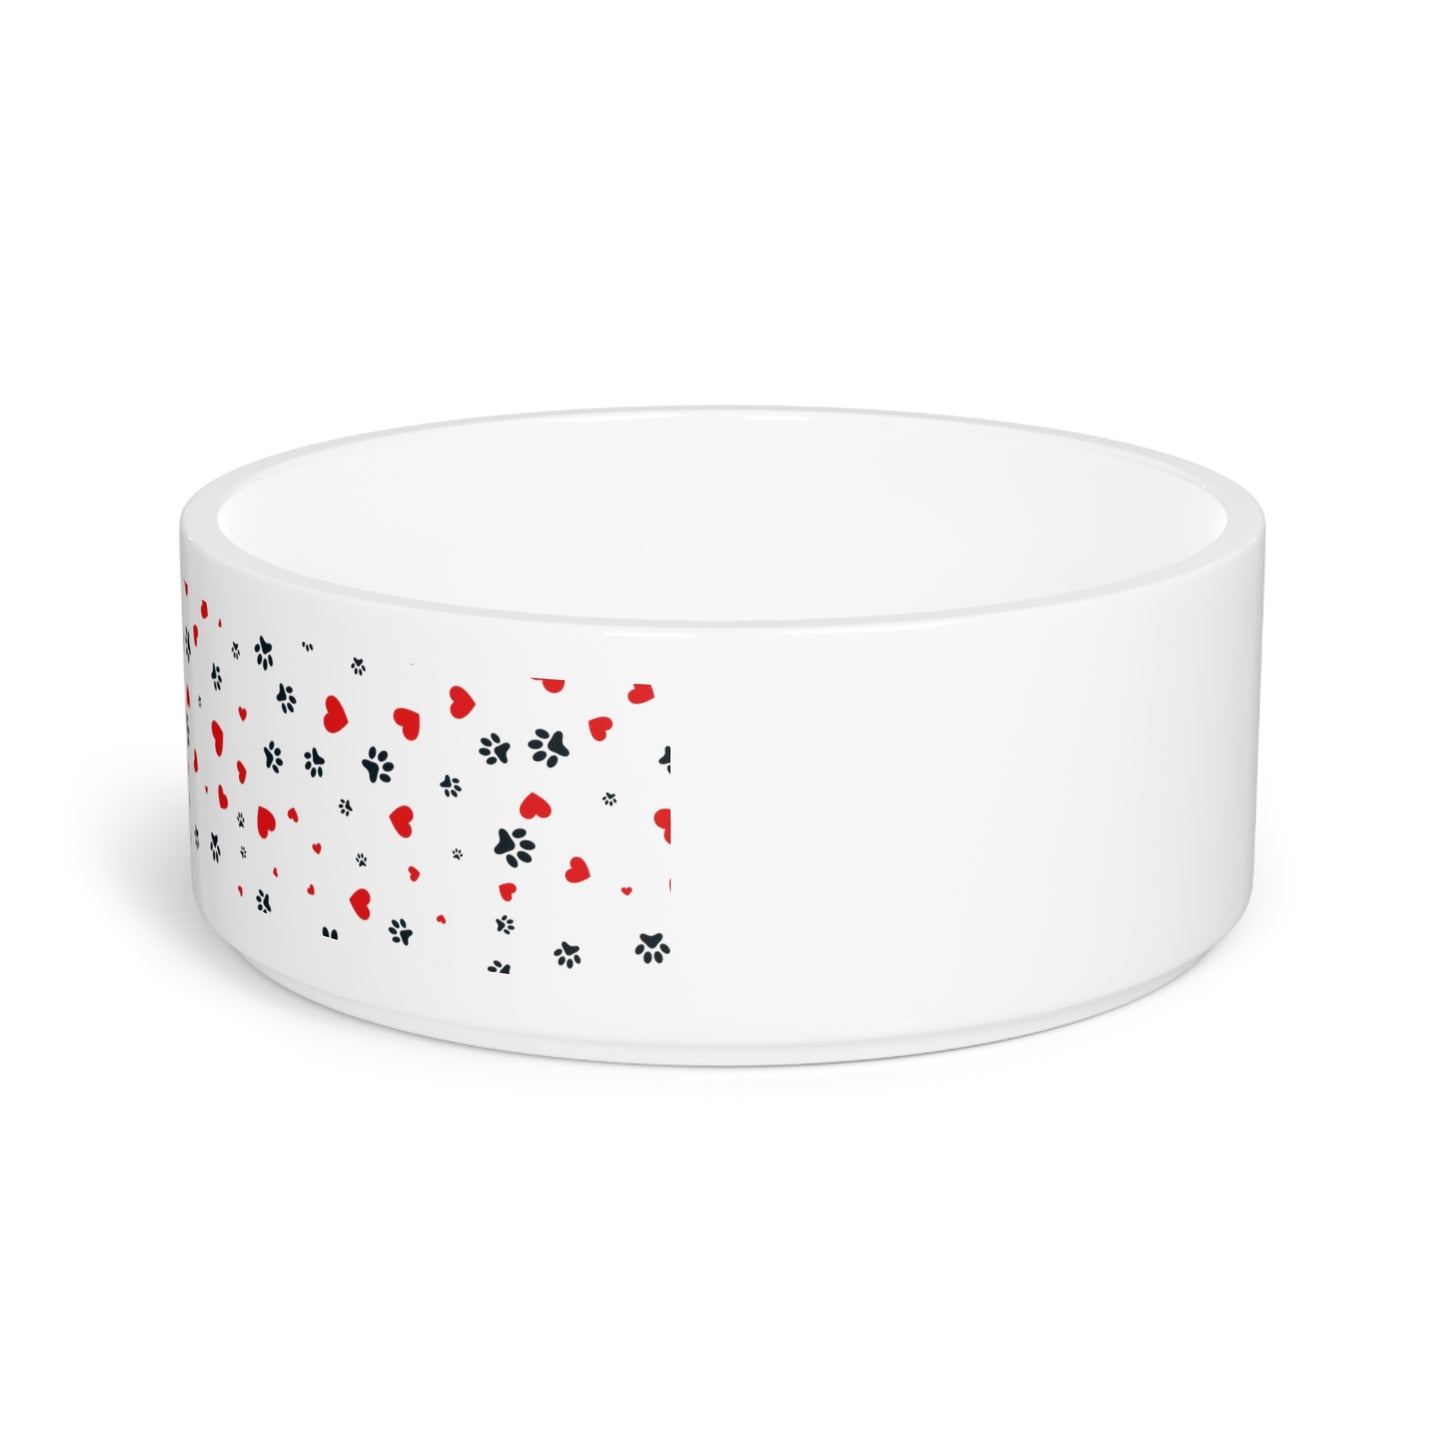 Niccie's Paws and Hearts Pet Bowl: Stylish, Durable, and Functional